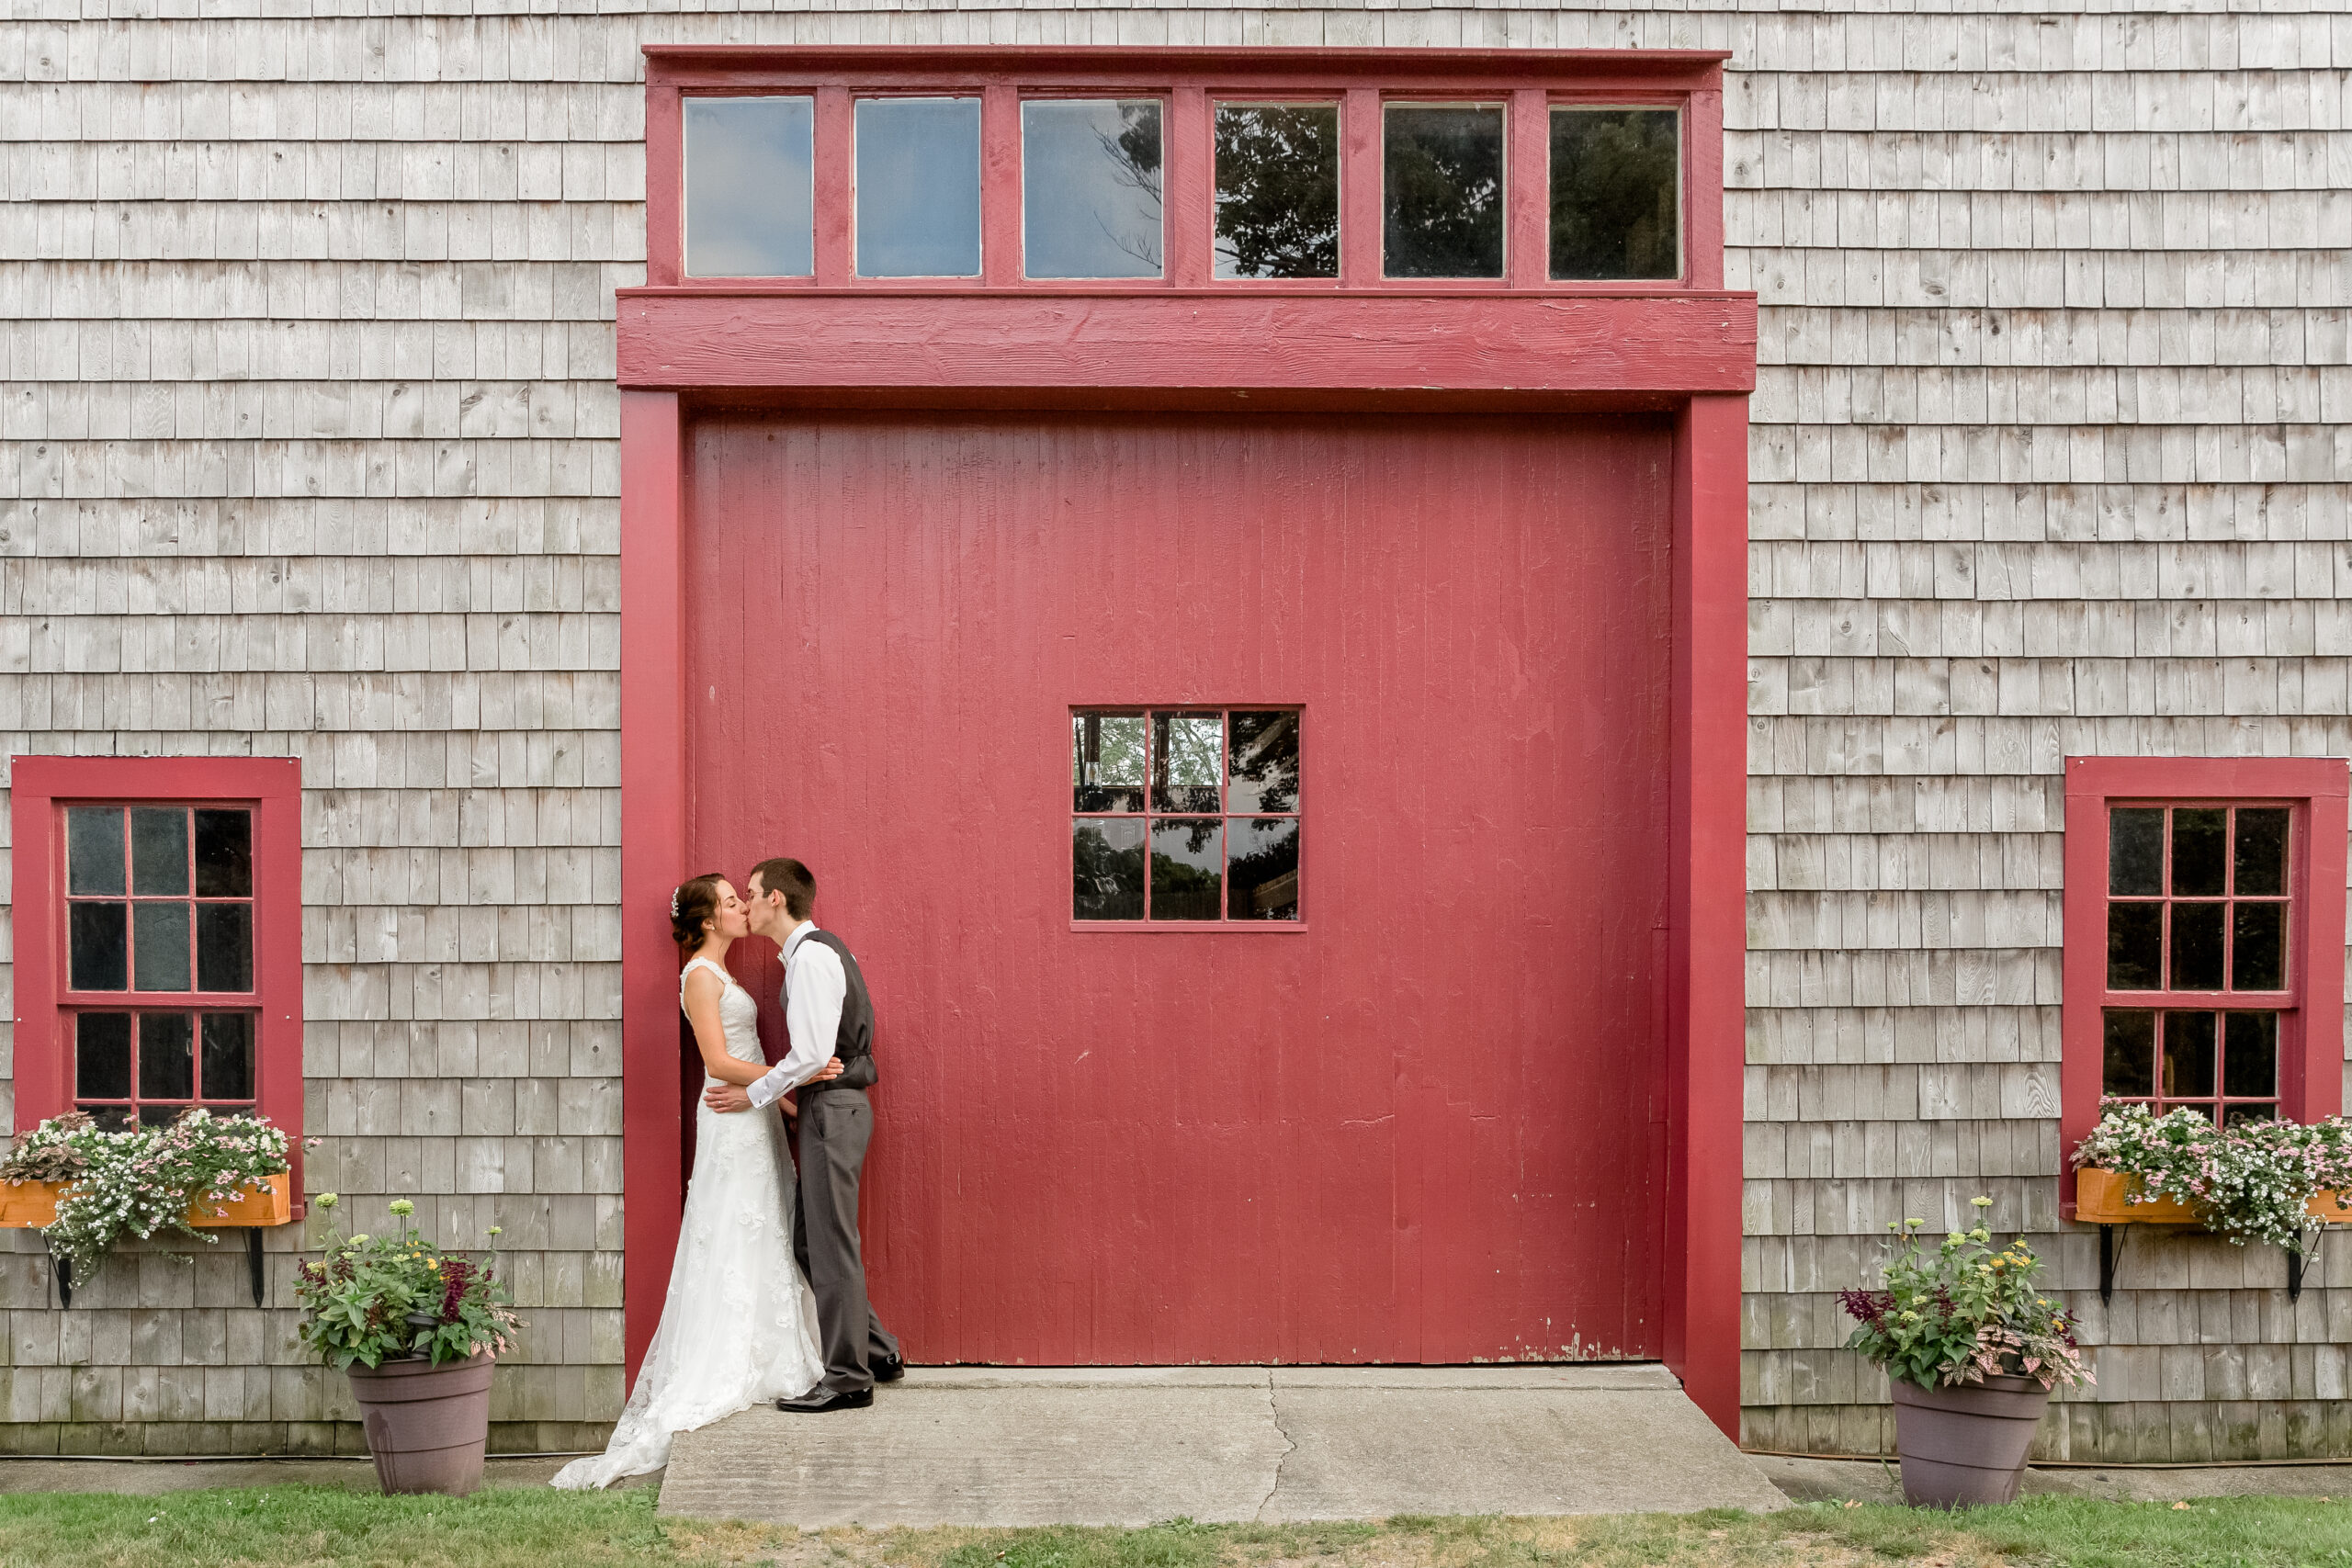 A bride and Groom share a kiss on their wedding day at Chamberlain Farms in Berkley MA.